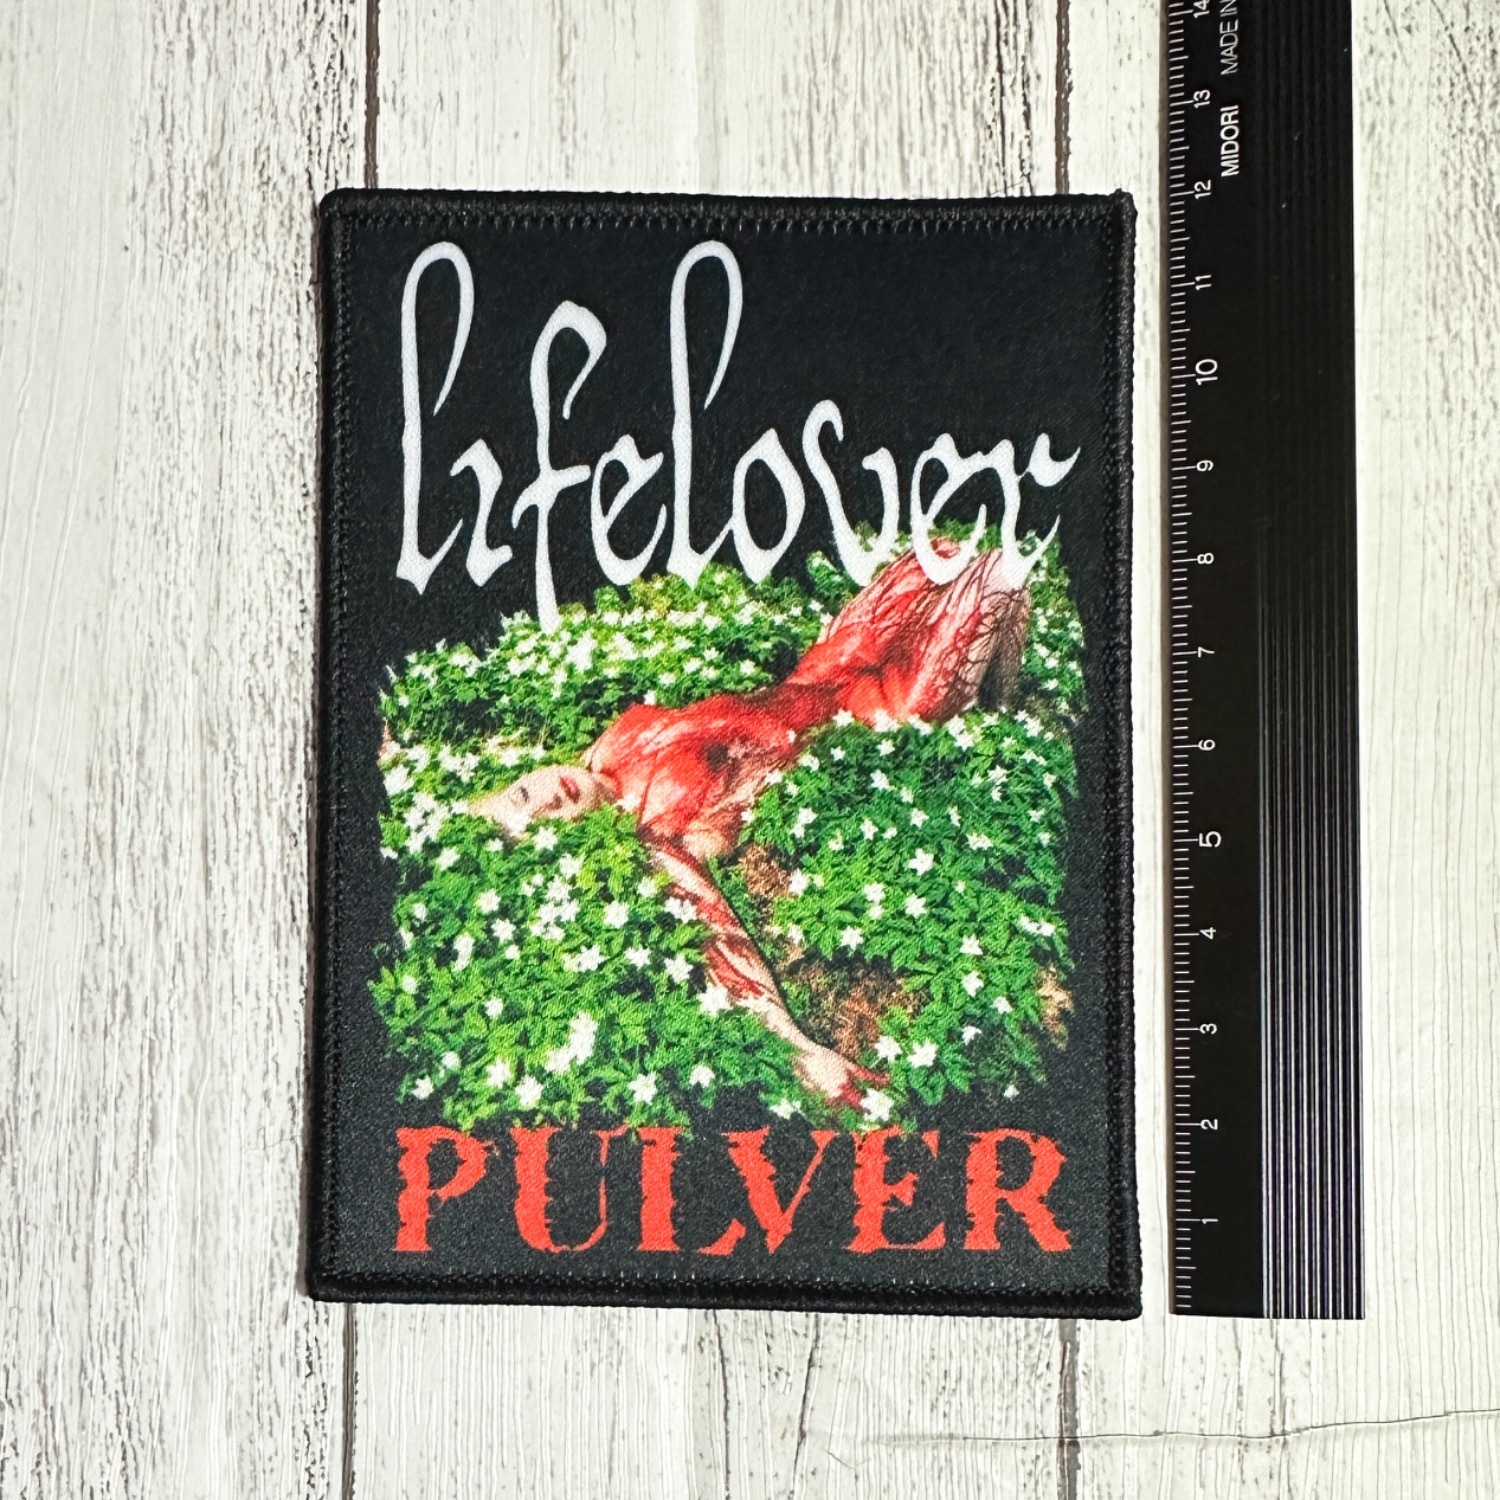 【Patch】Lifelover - Pulver 【Small Patch】